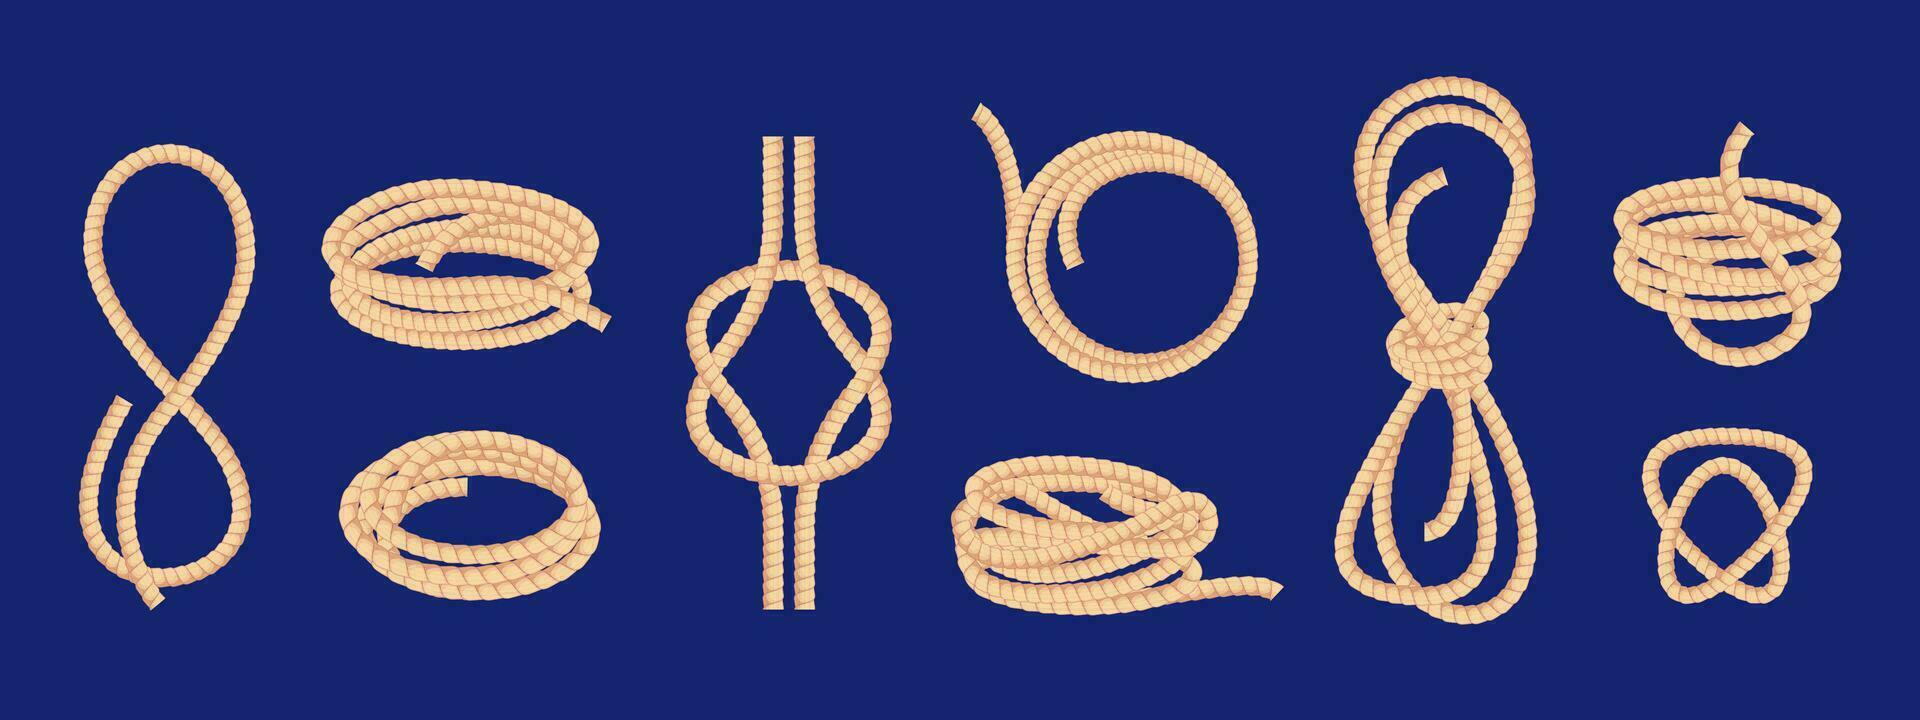 Folded ropes. Sketch trimming icons for catching cattle, twisted braided string thread knotted ship lasso folded in different ways. Vector isolated set